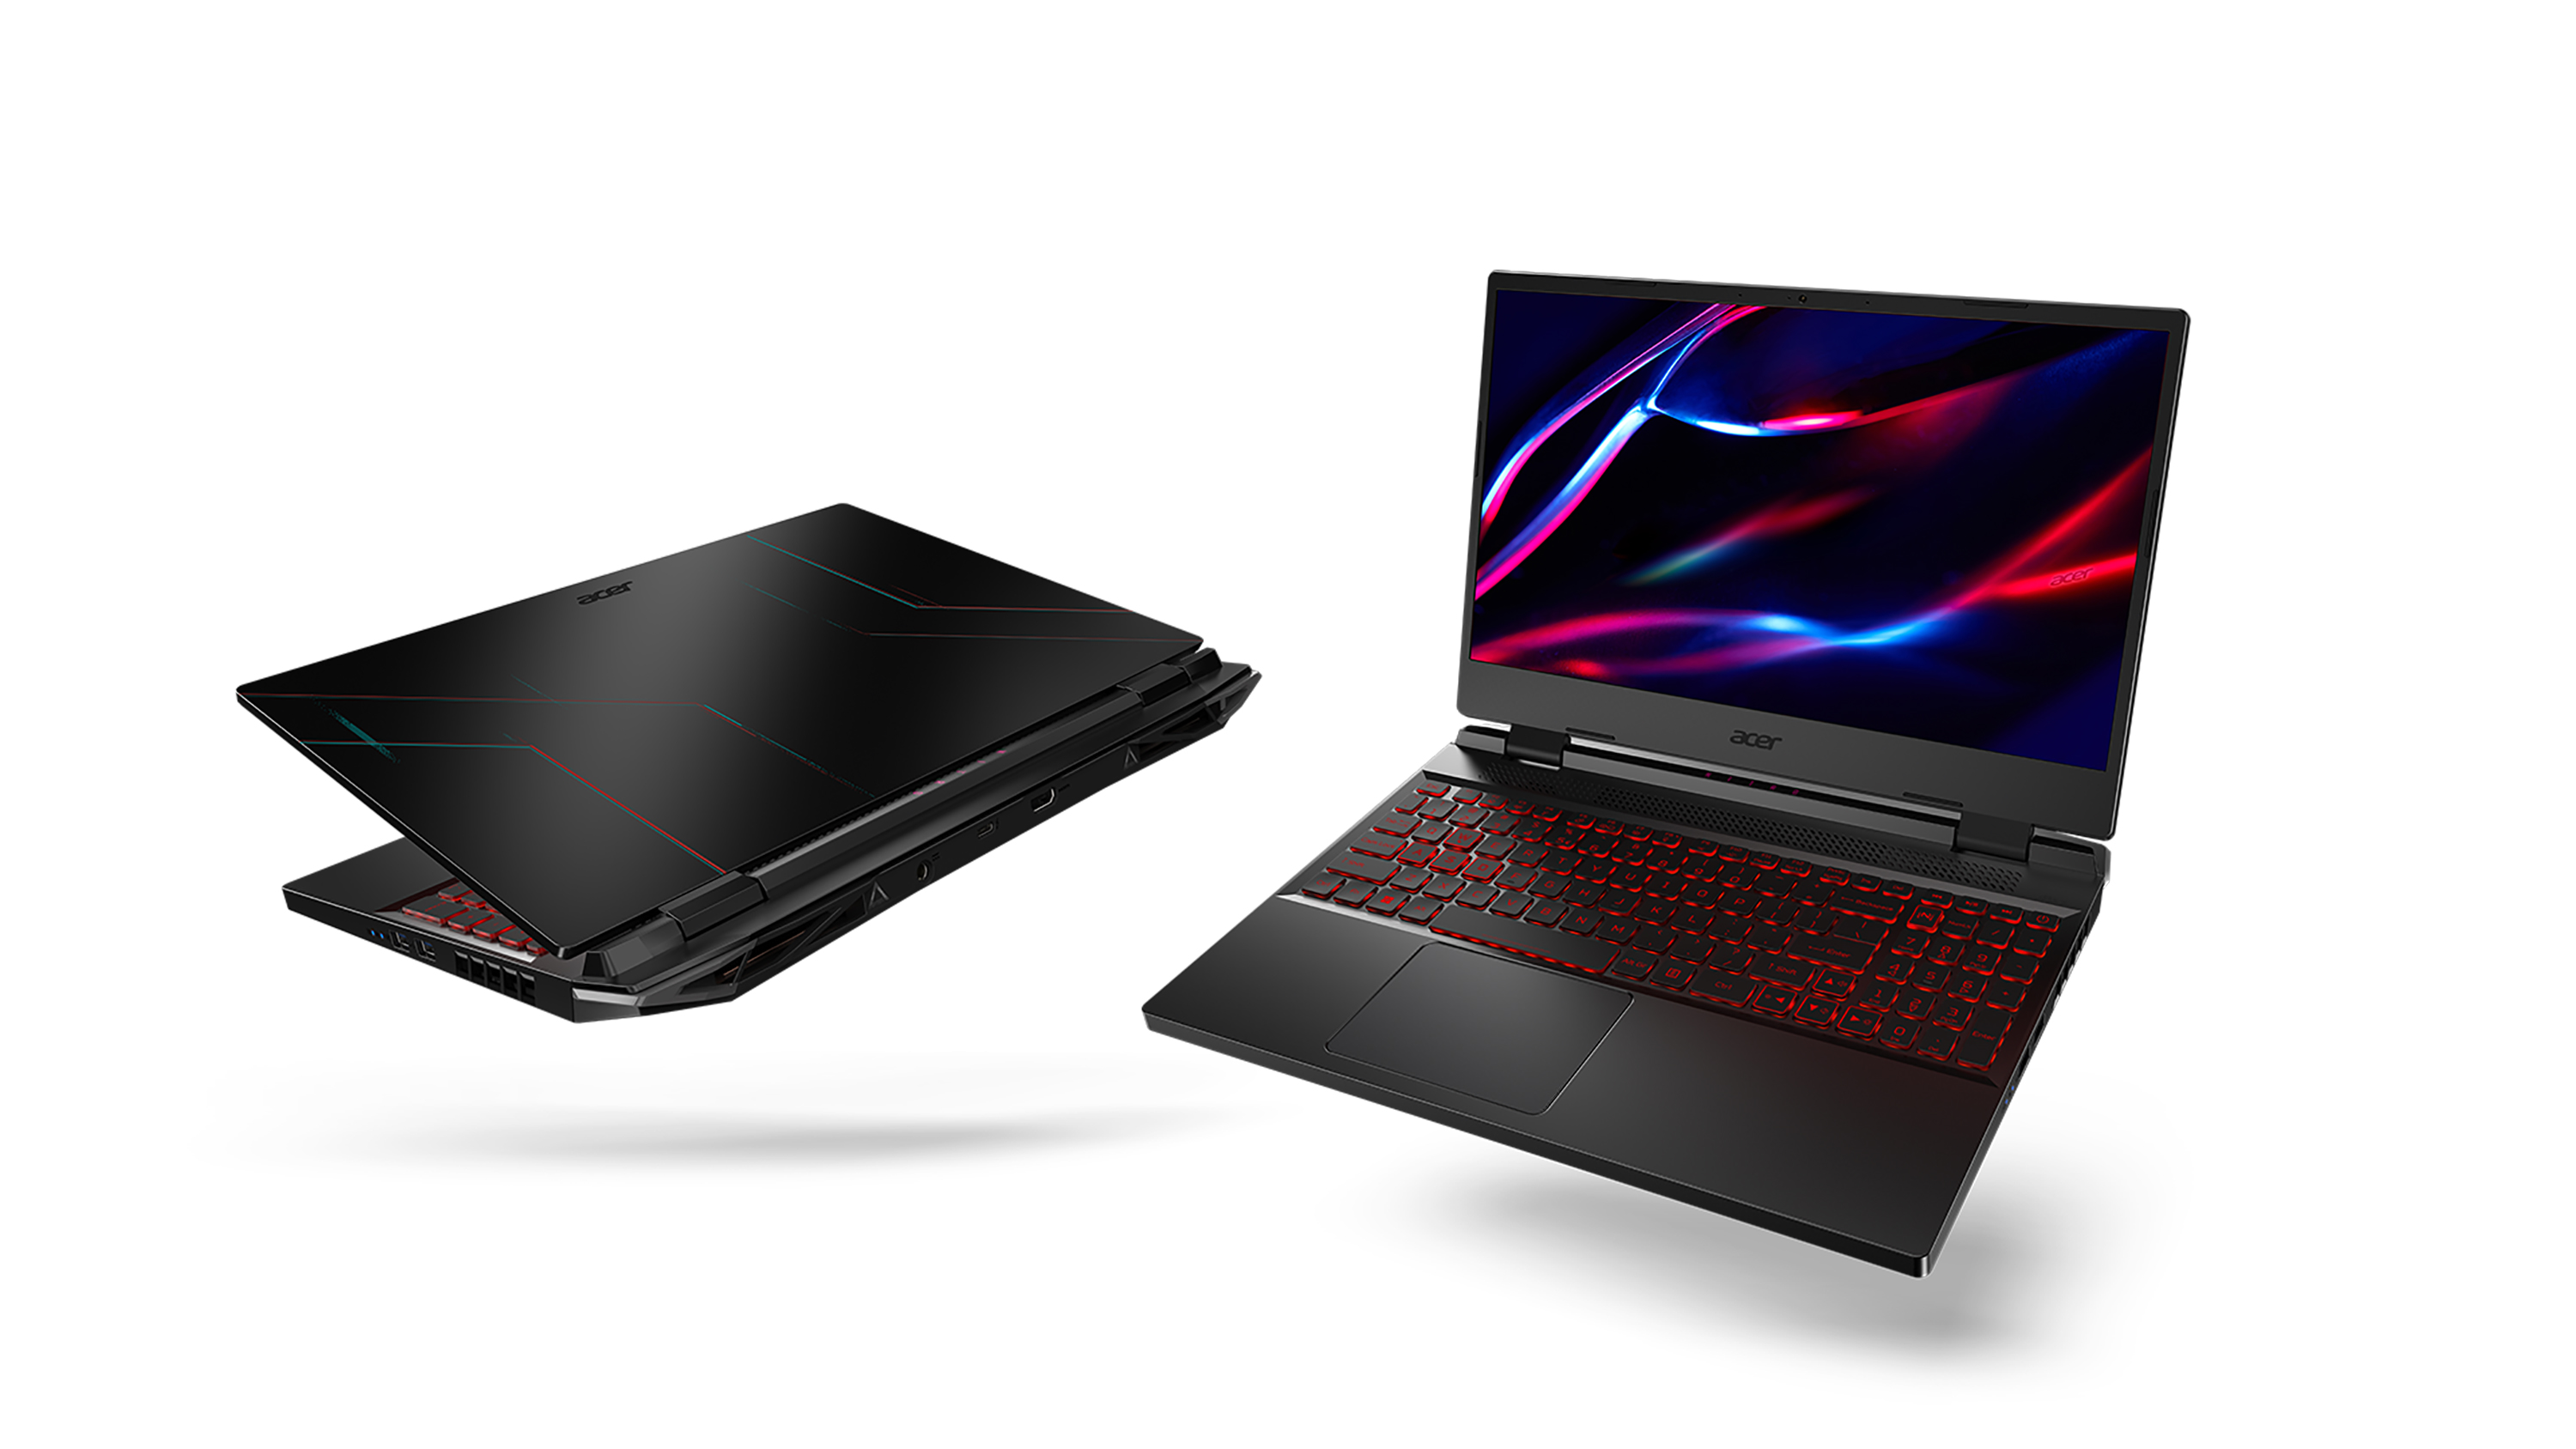 Acer Launches New Gaming Laptops with the Latest CPUs and GPUs